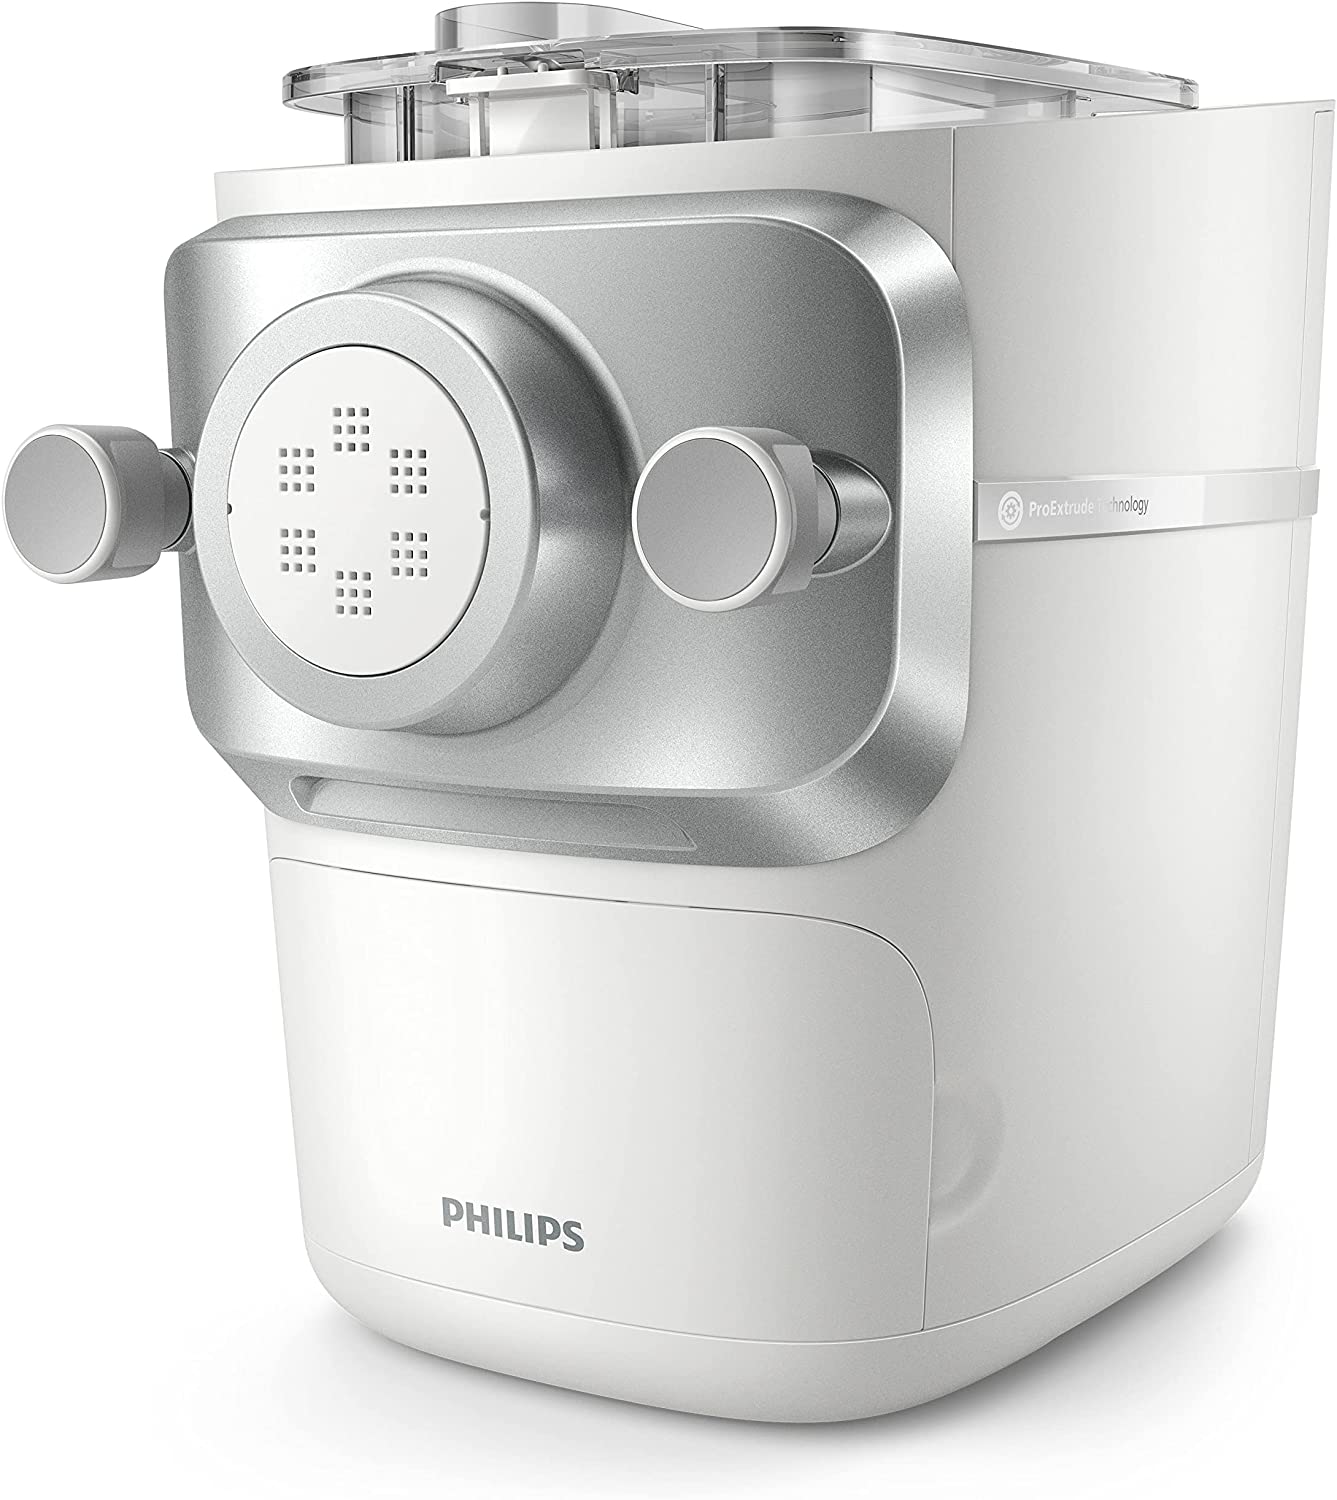 Philips Domestic Appliances Philips Pasta Maker - ProExtrude Technology, Fully Automatic, Weighing Function, 6 Mould Attachments, White (HR2660/00)